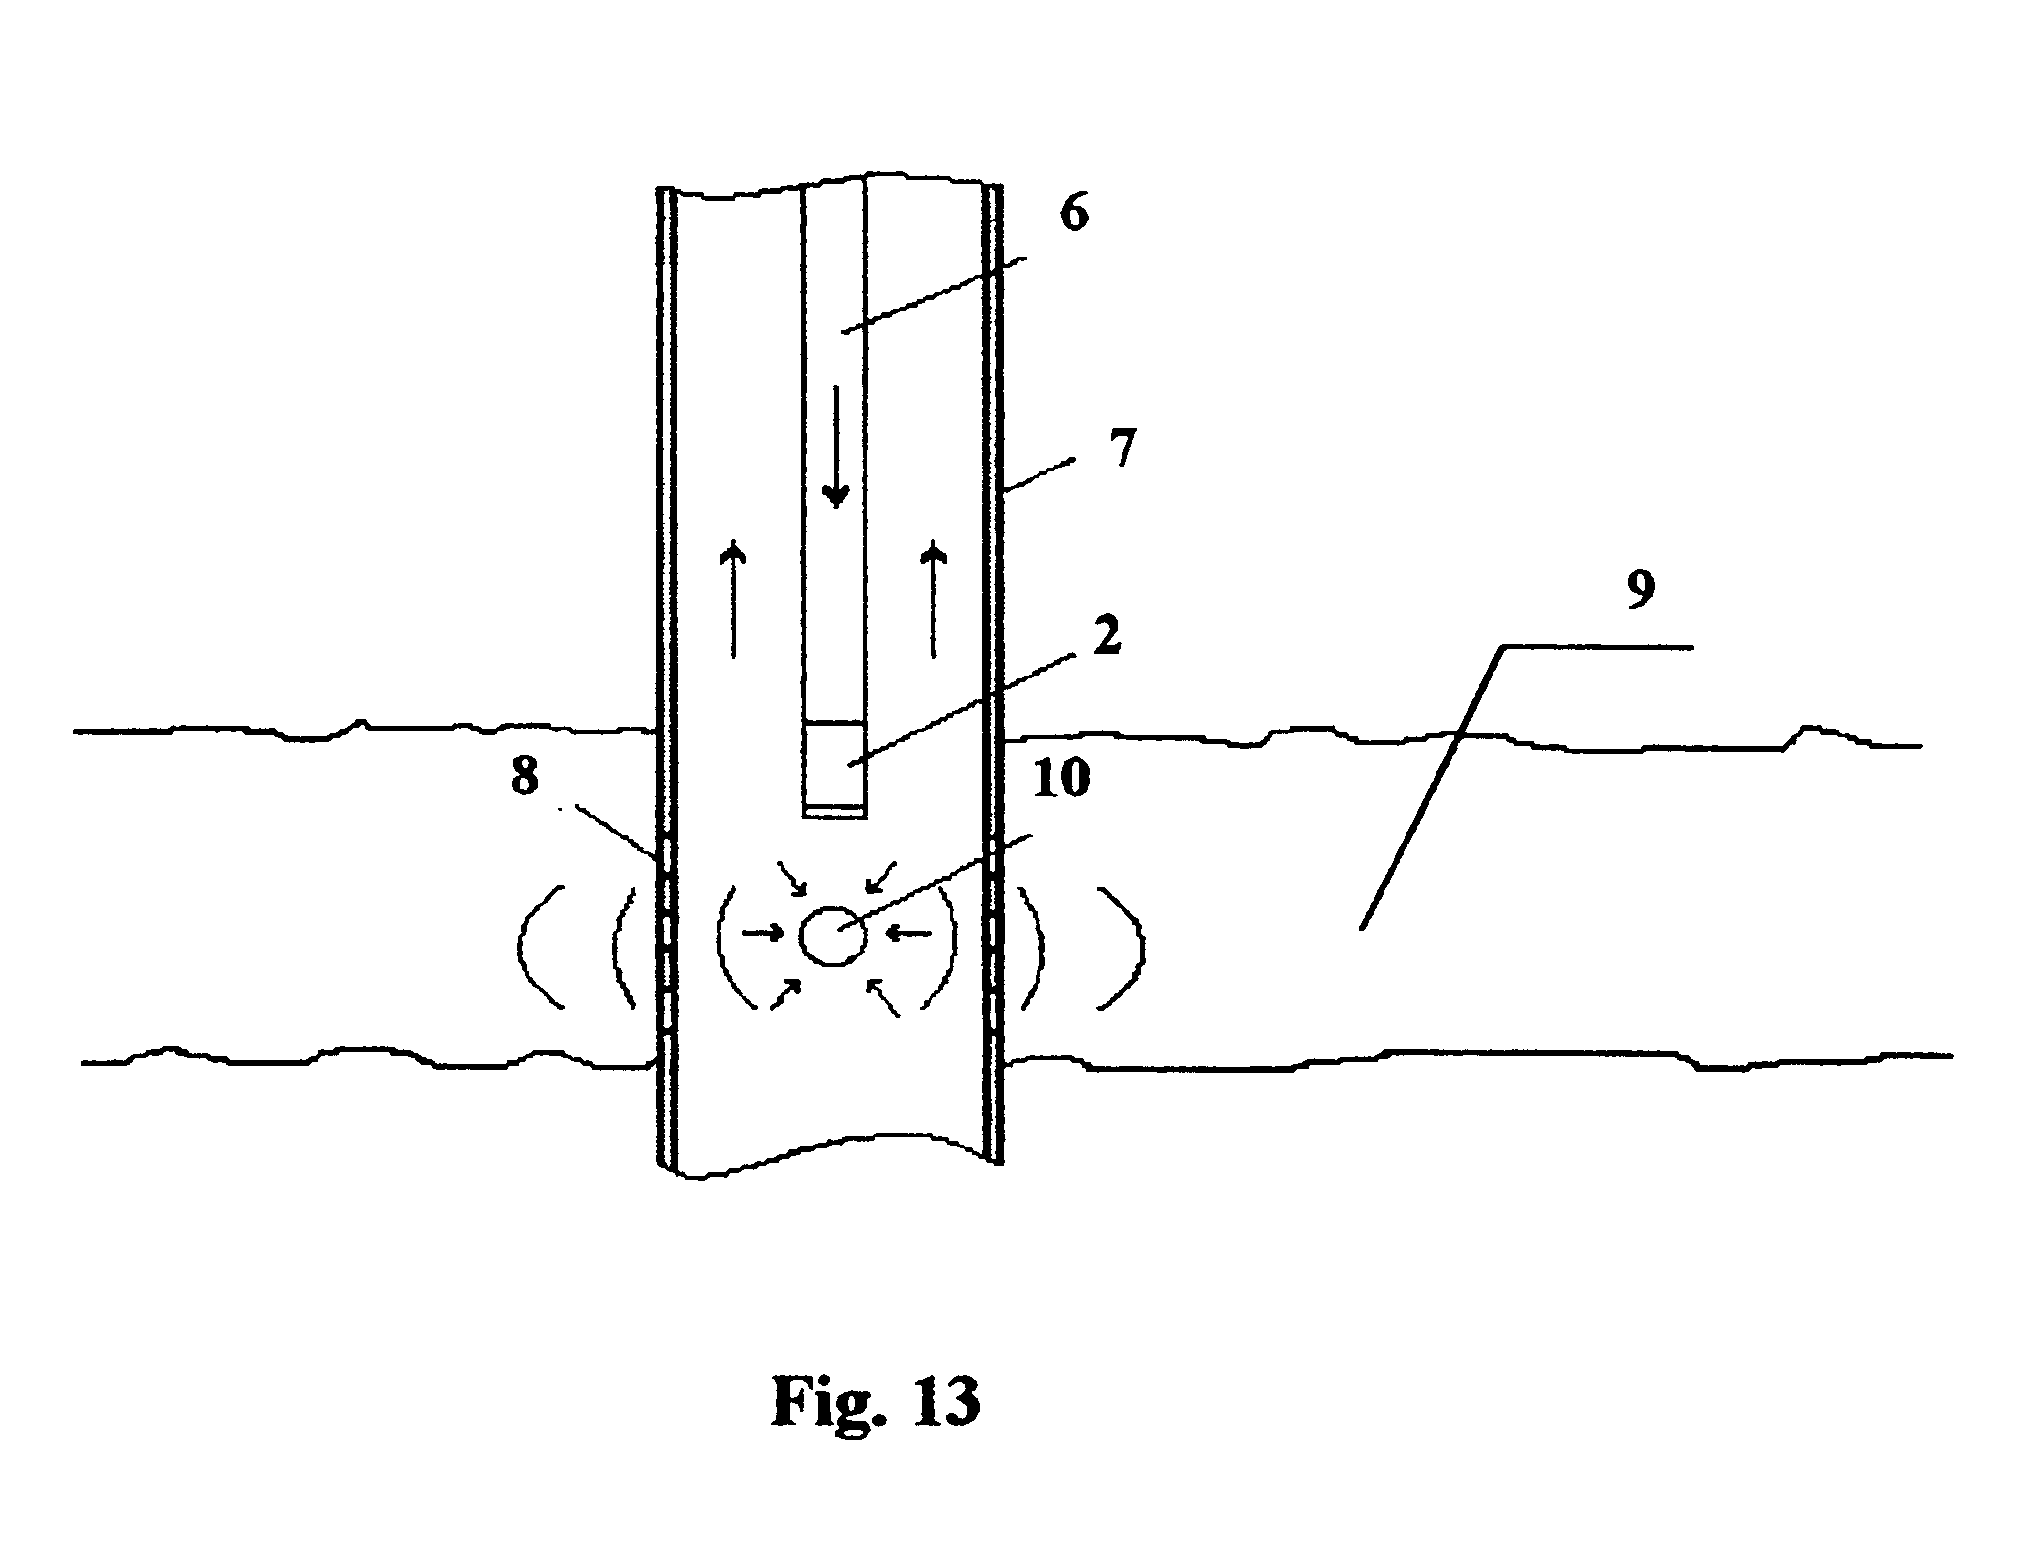 Method and apparatus for producing fluid cavitation